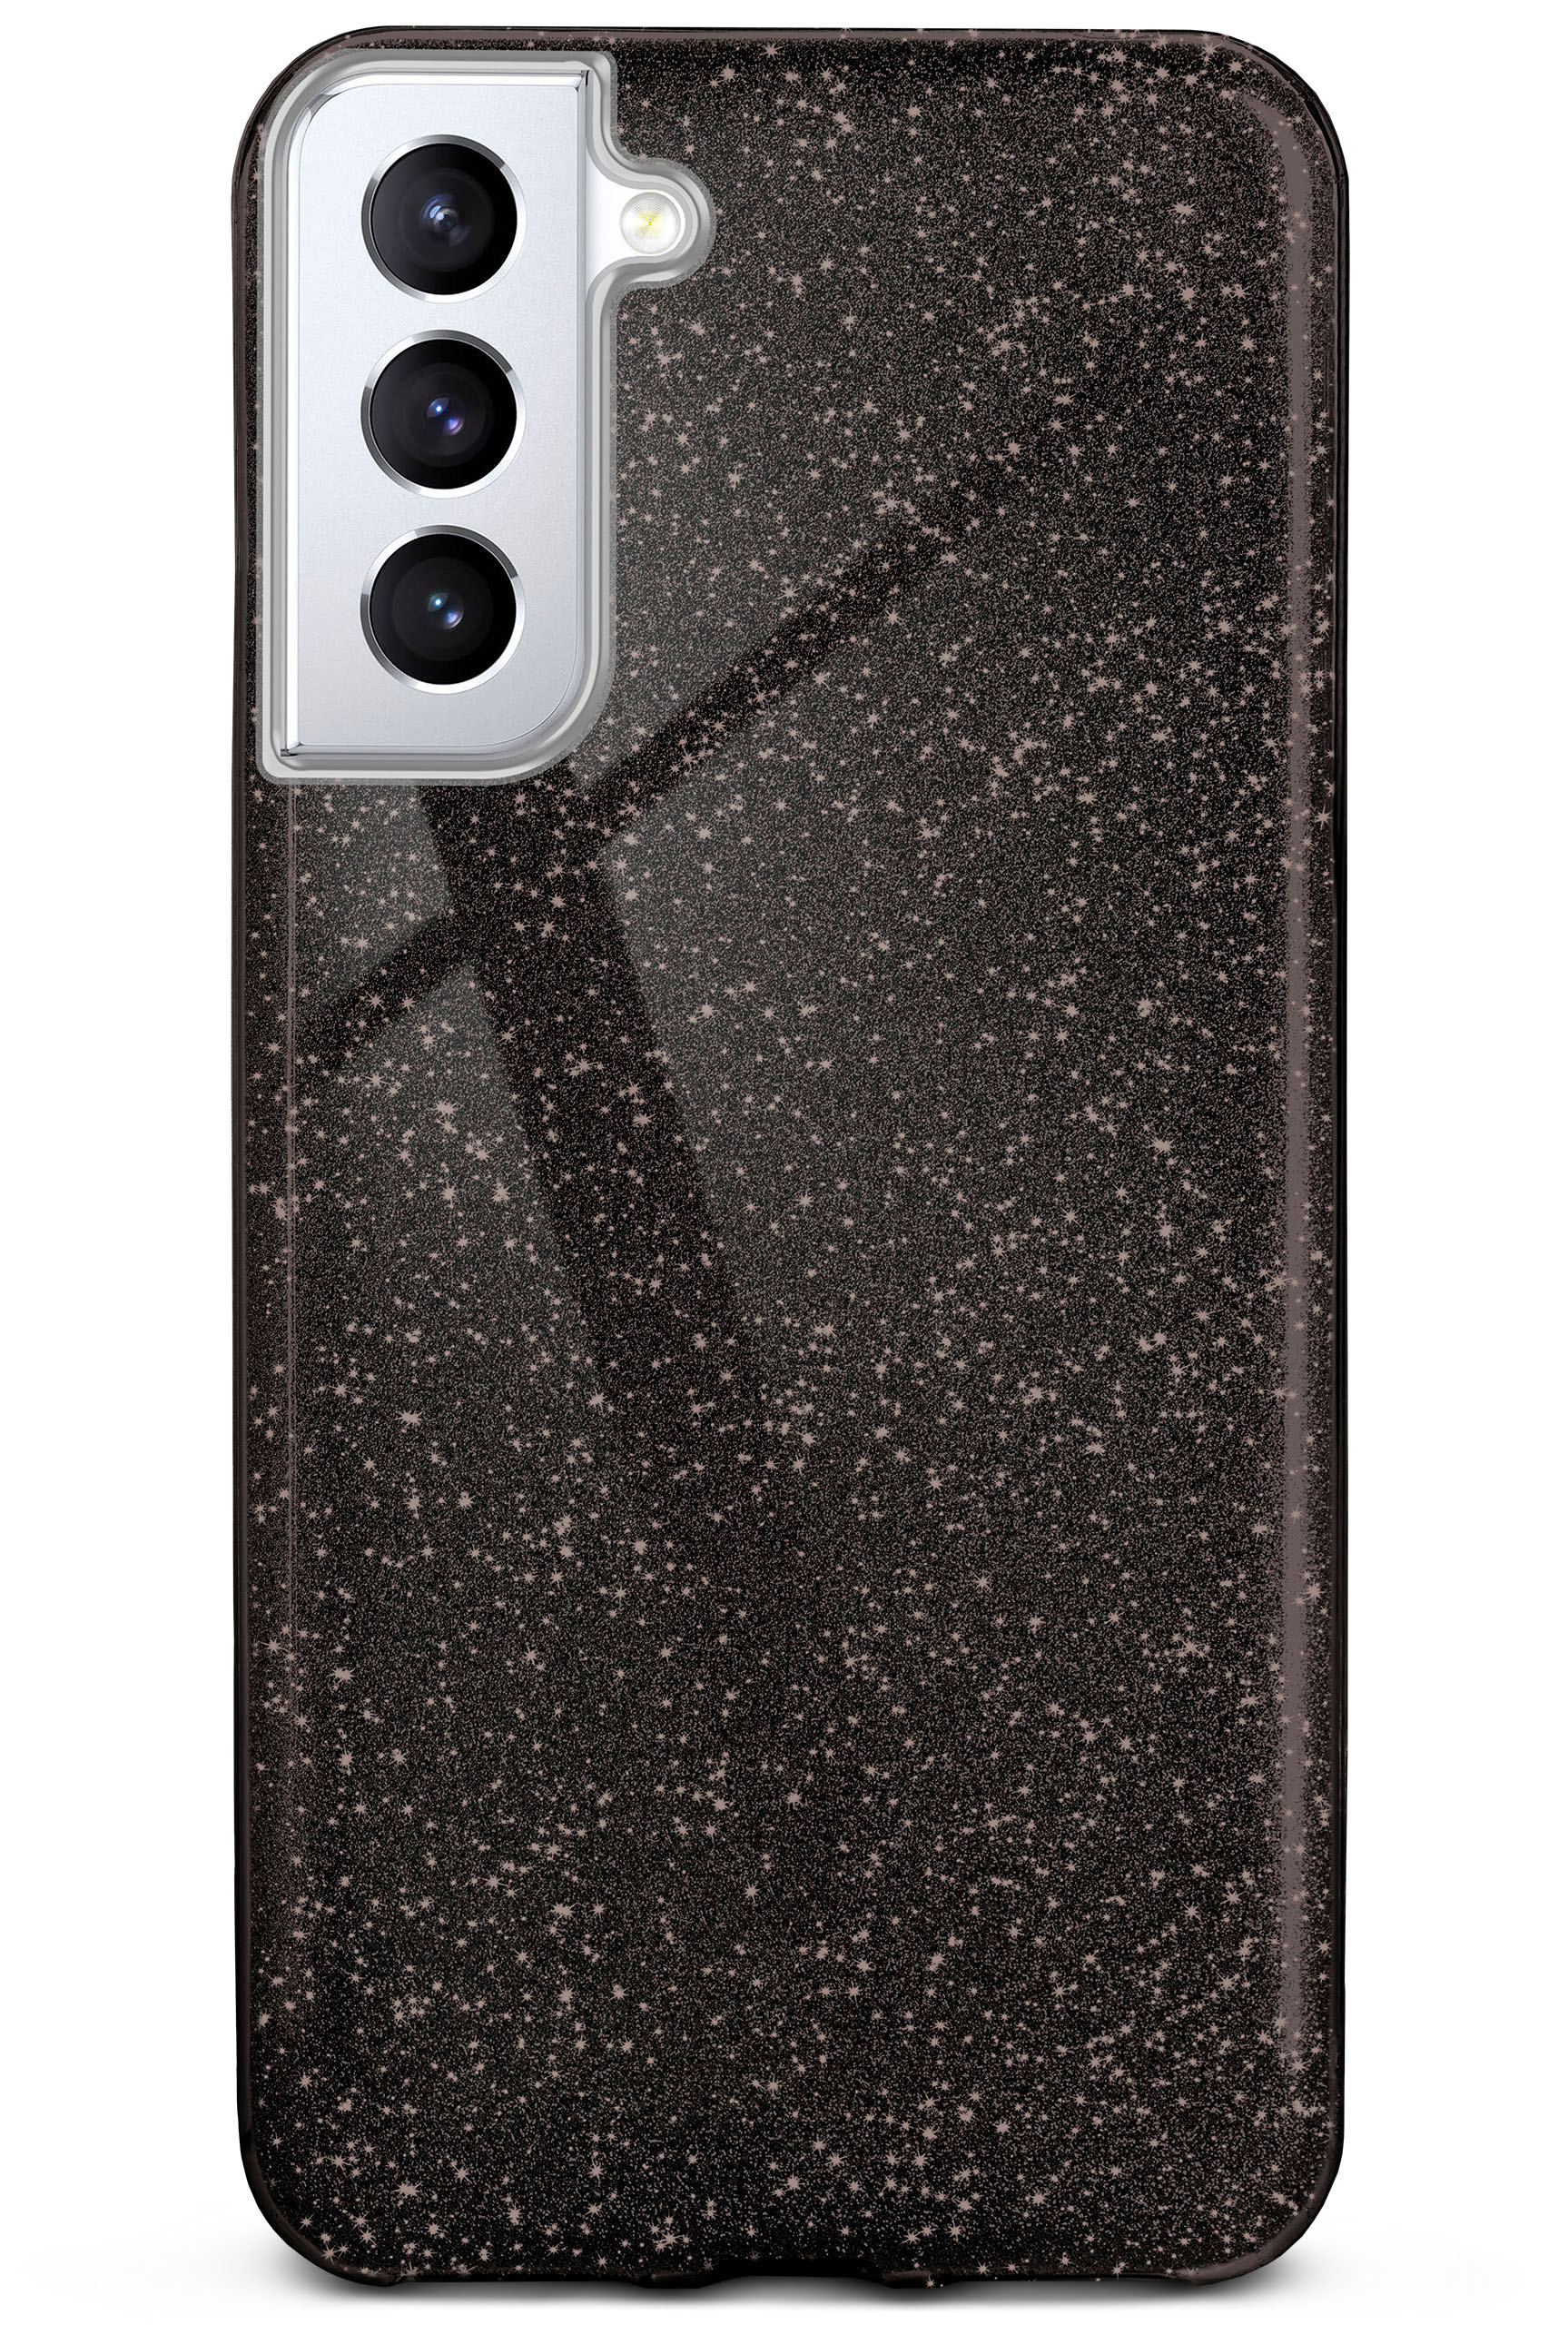 Samsung, - Glitter Black Glamour ONEFLOW Case, Galaxy S21, Backcover,